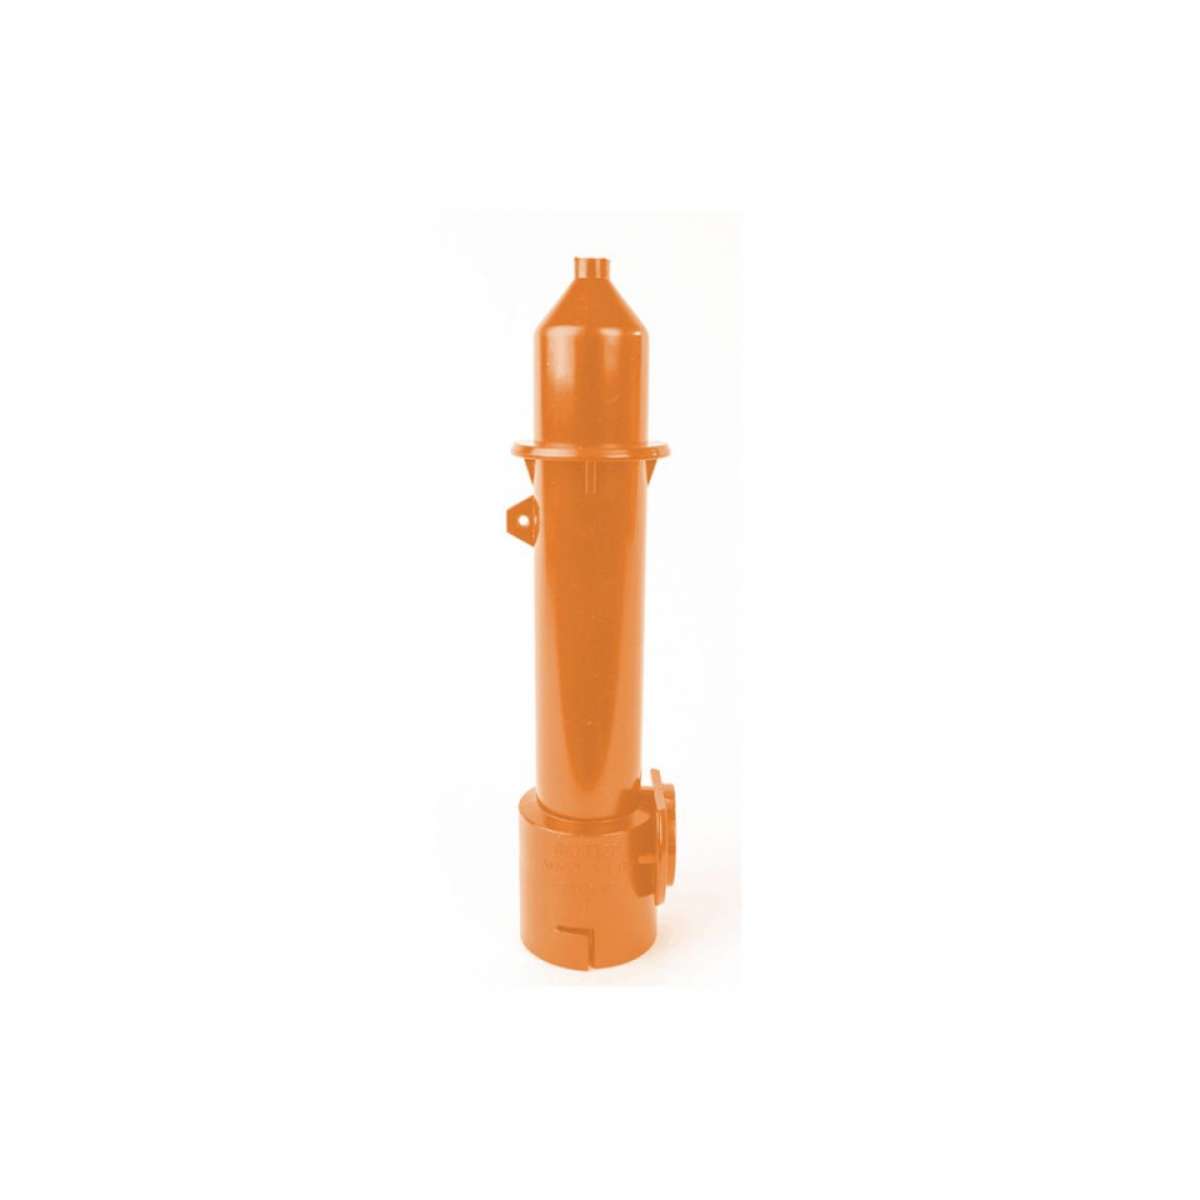 IsoLink 8" Rigid Spout with 1/4" Tip - Orange